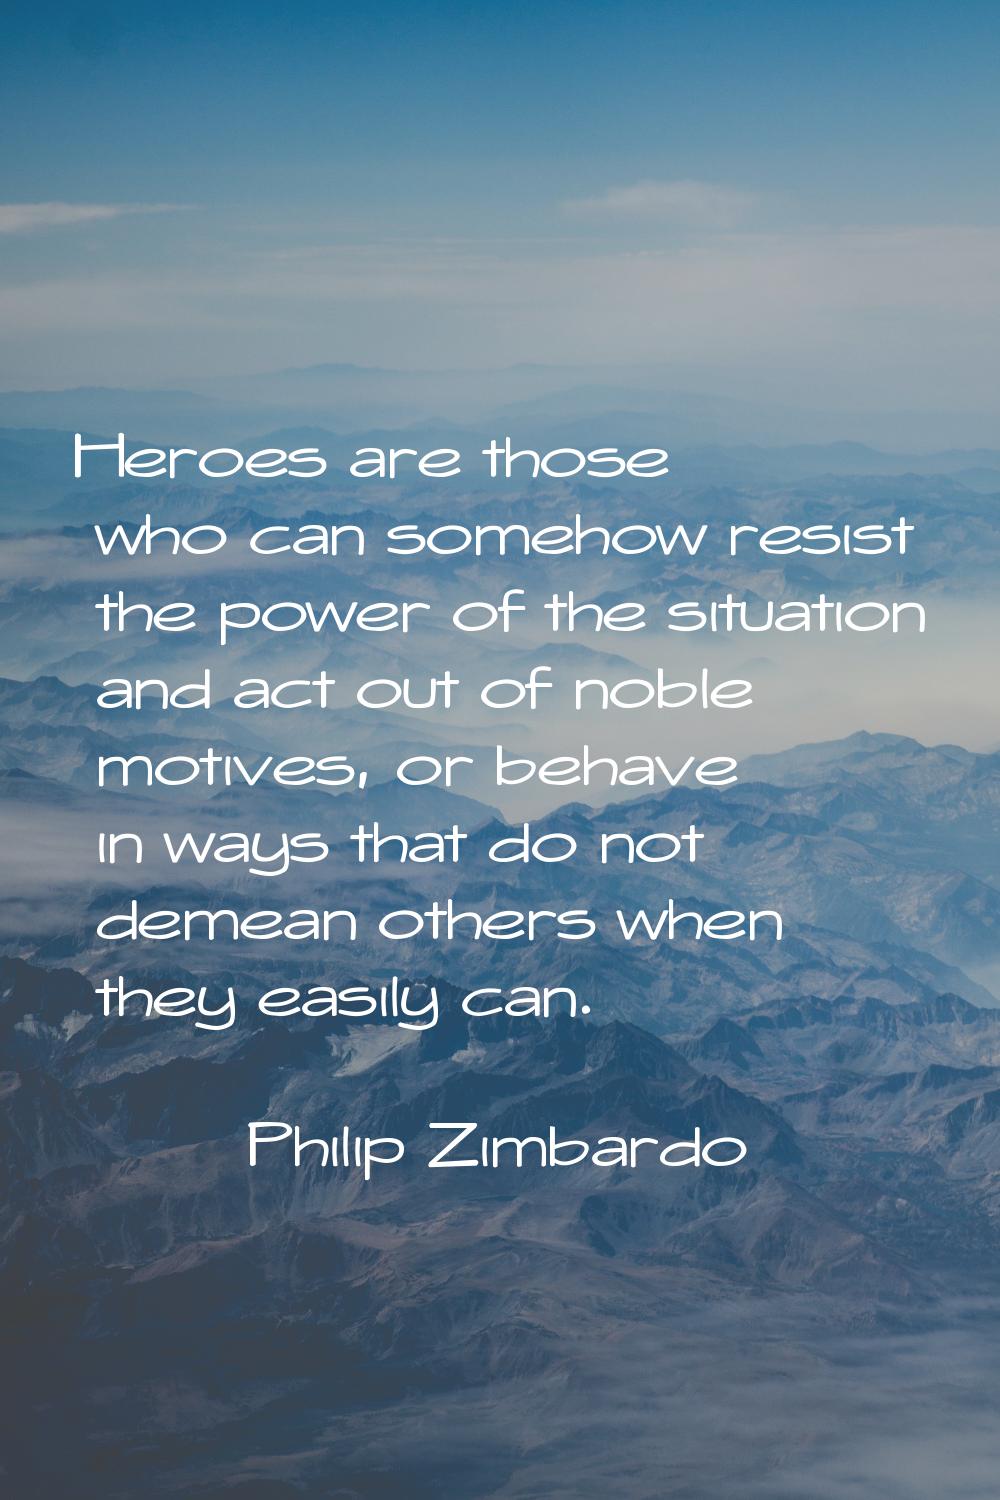 Heroes are those who can somehow resist the power of the situation and act out of noble motives, or